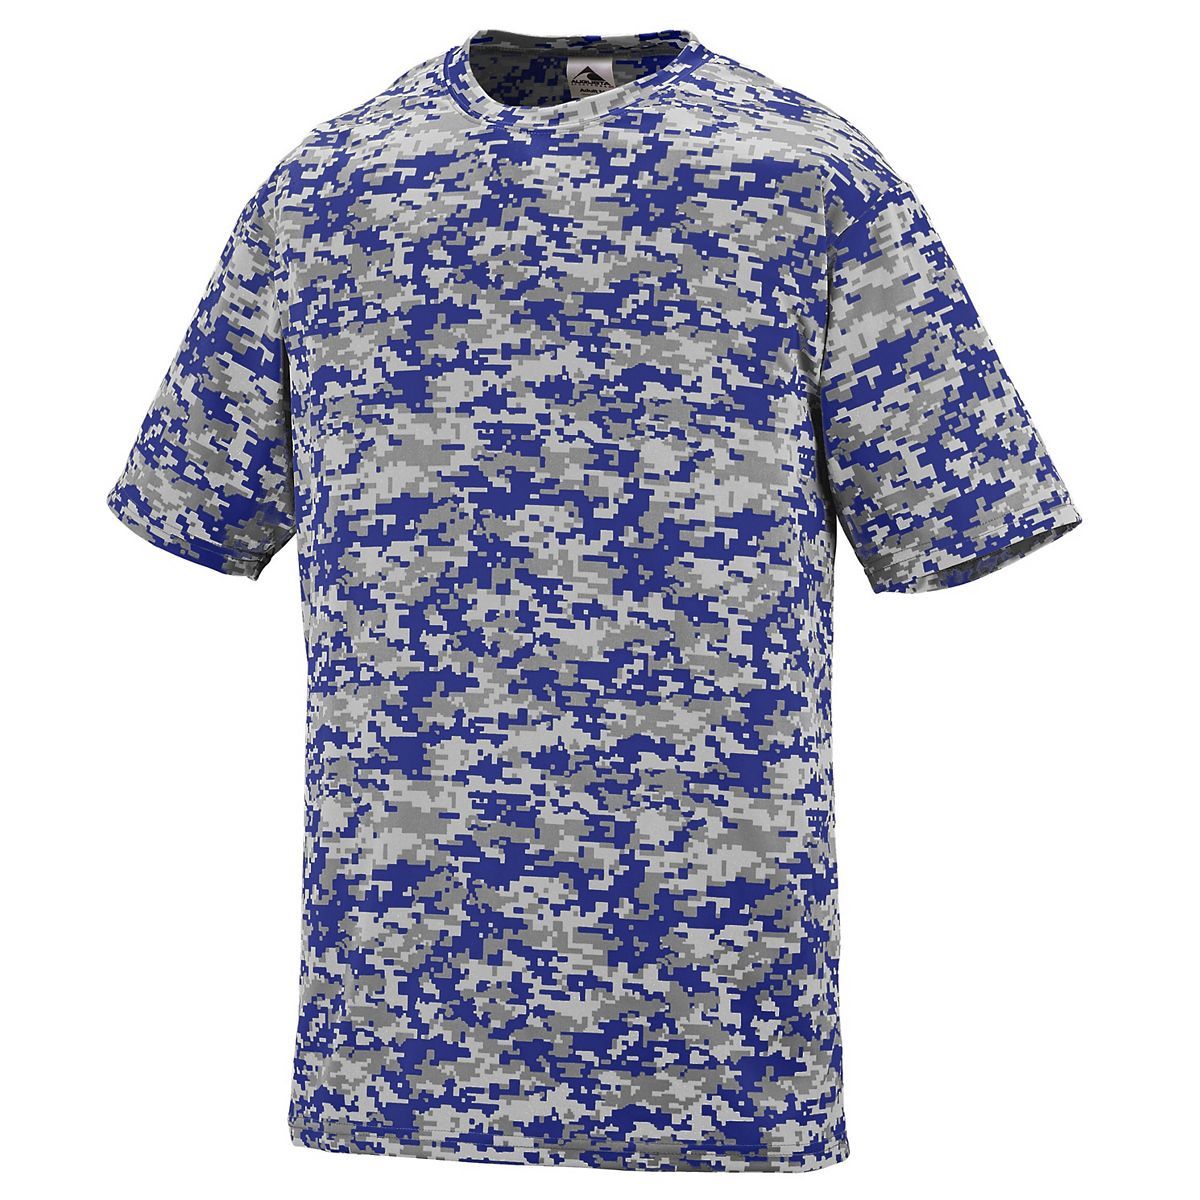 Augusta Sportswear Youth Digi Camo Wicking T-Shirt in Purple Digi  -Part of the Youth, Youth-Tee-Shirt, T-Shirts, Augusta-Products, Shirts product lines at KanaleyCreations.com